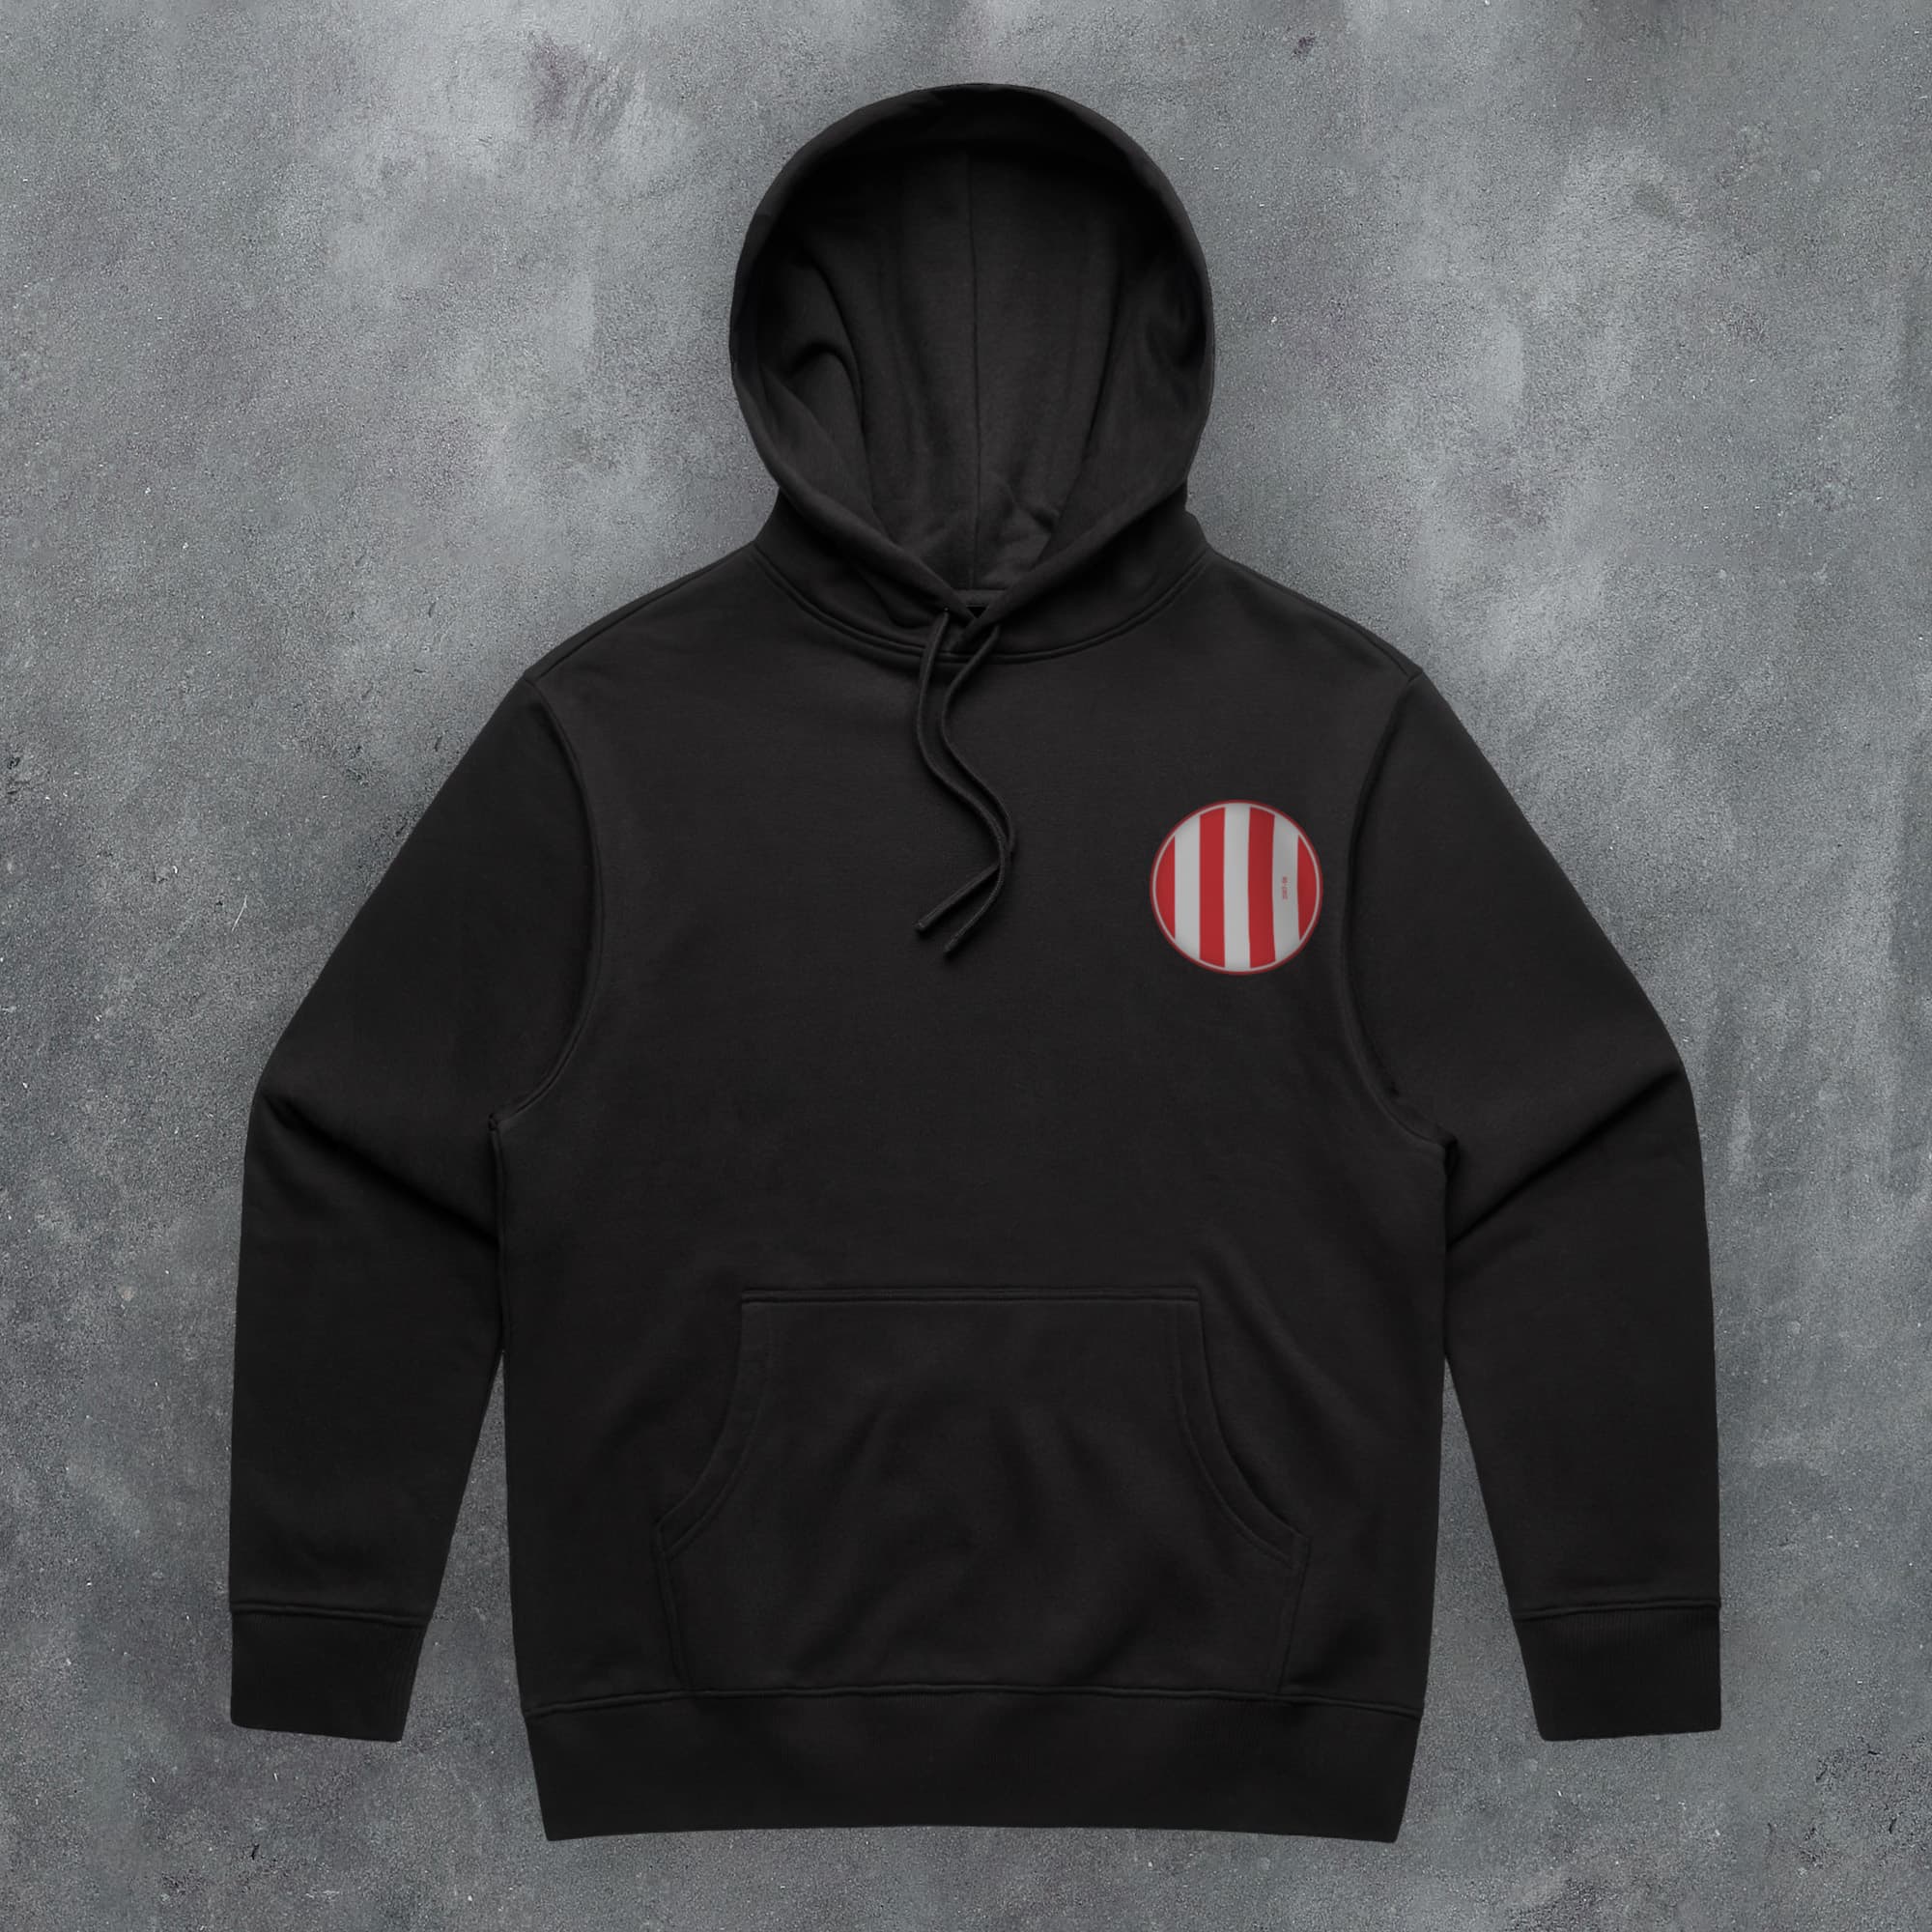 a black hoodie with a red and white stripe on it